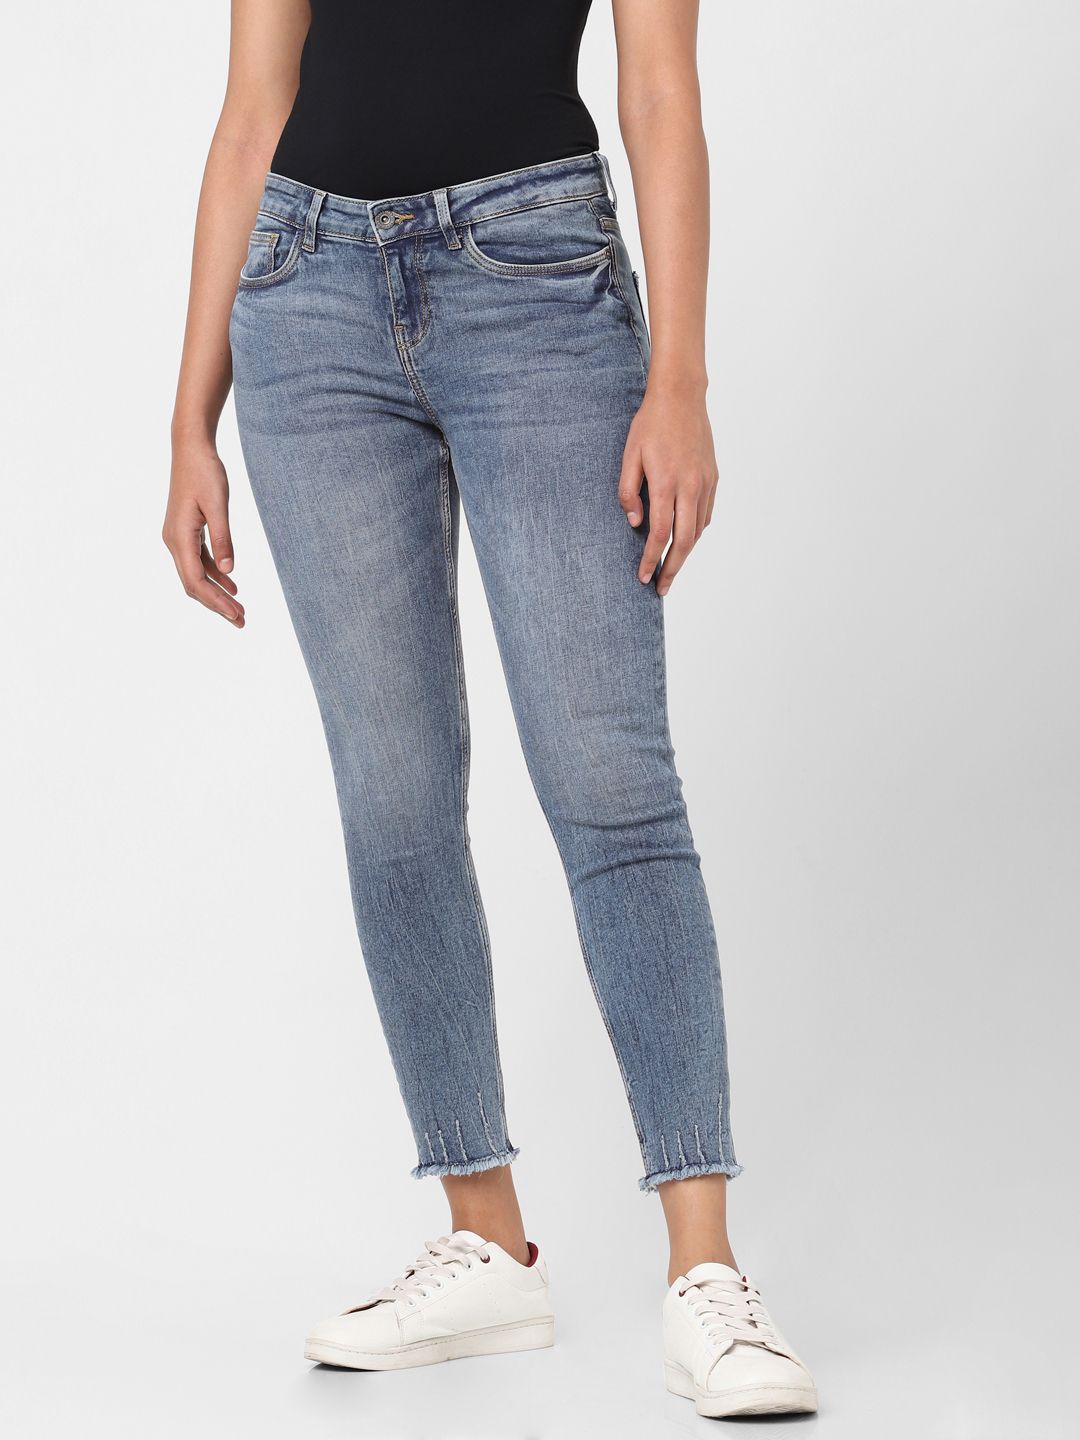 Vero Moda Women Blue Skinny Fit Low Distress Light Fade Ankle Length Stretchable Jeans Price in India